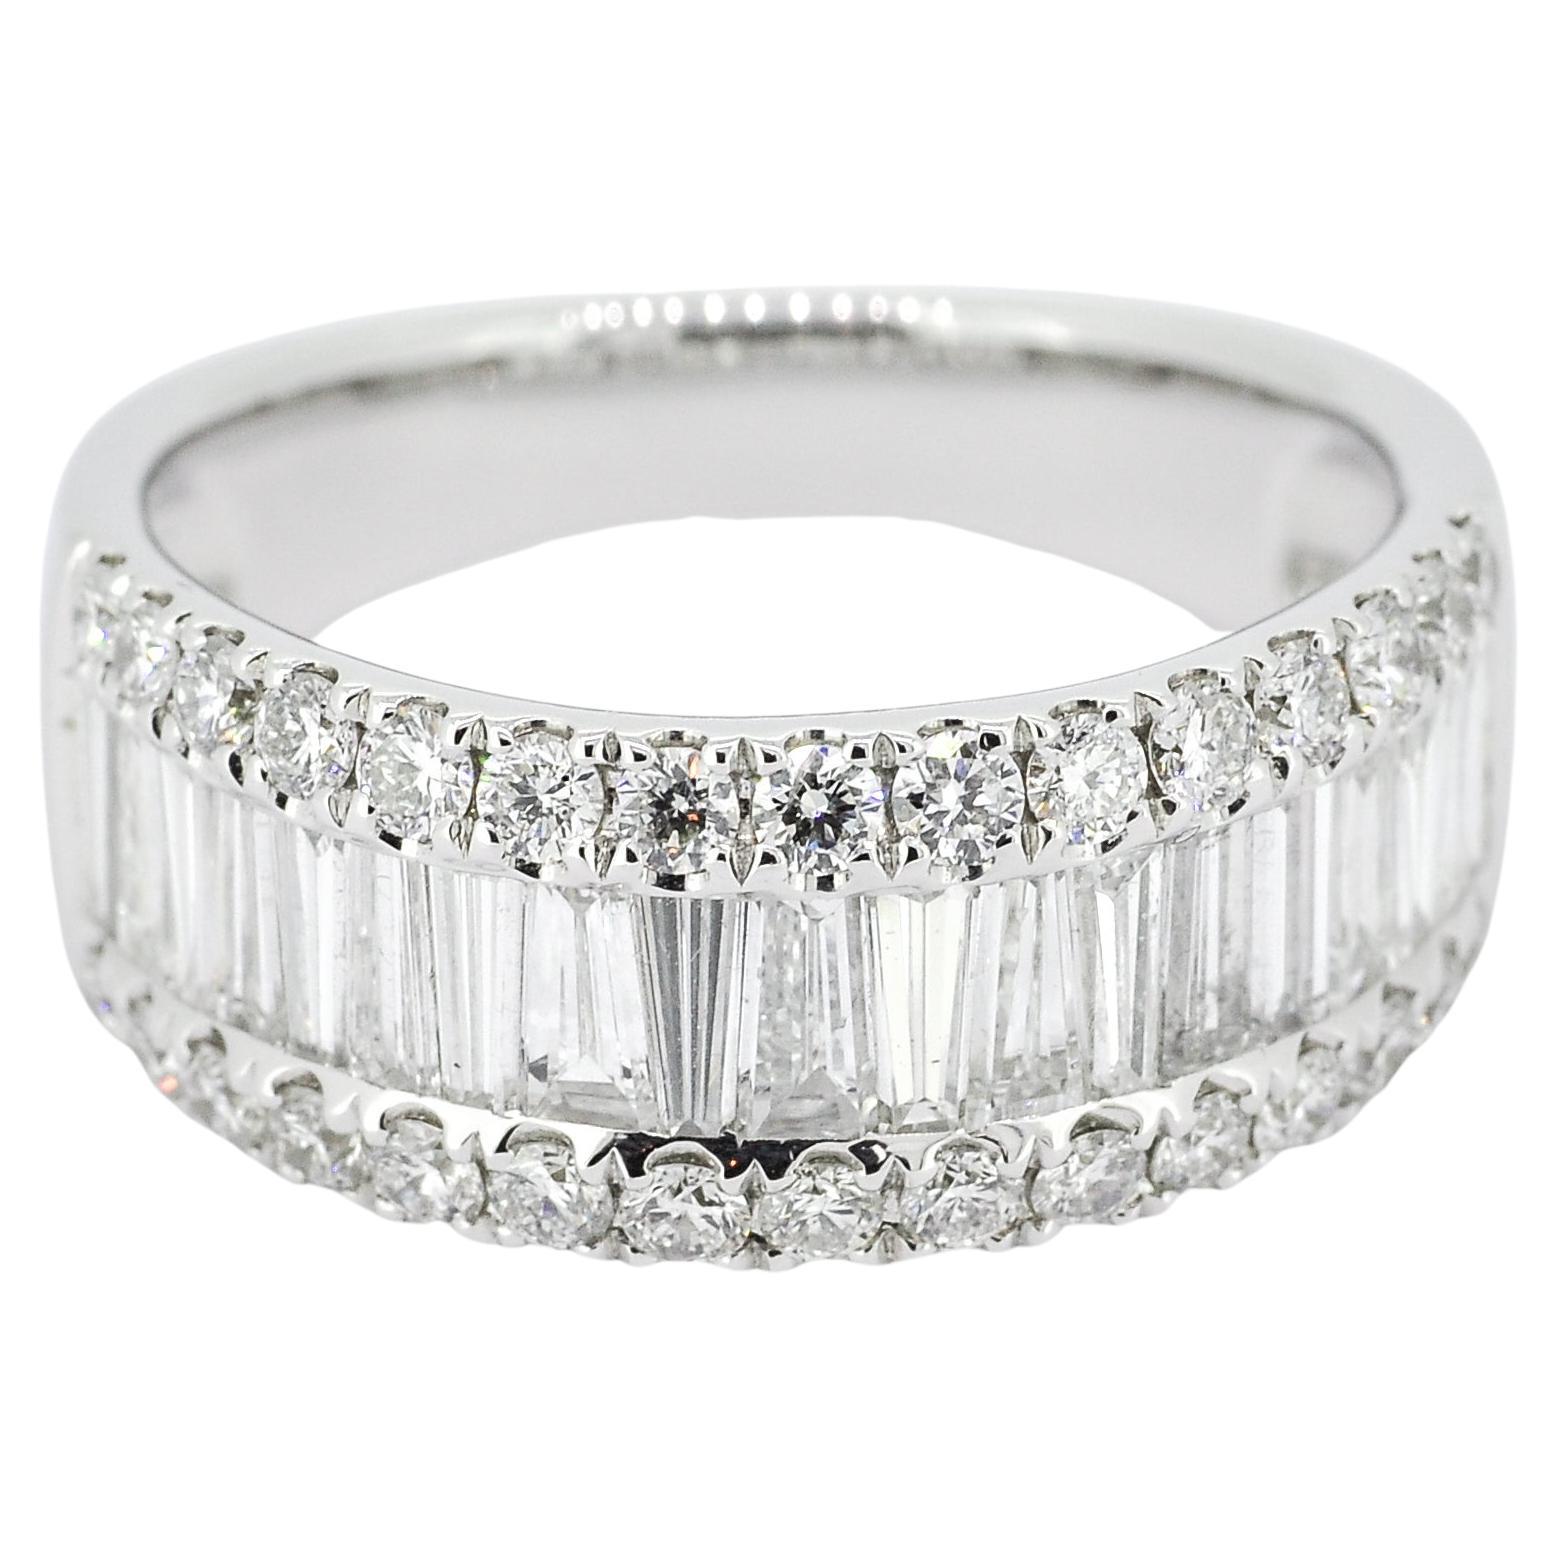 This 18K white gold anniversary ring features a timeless design with sparkling baguette diamonds set in a channel setting. The half-band design makes it perfect for everyday wear and pairing with other rings—a beautiful and enduring way to celebrate